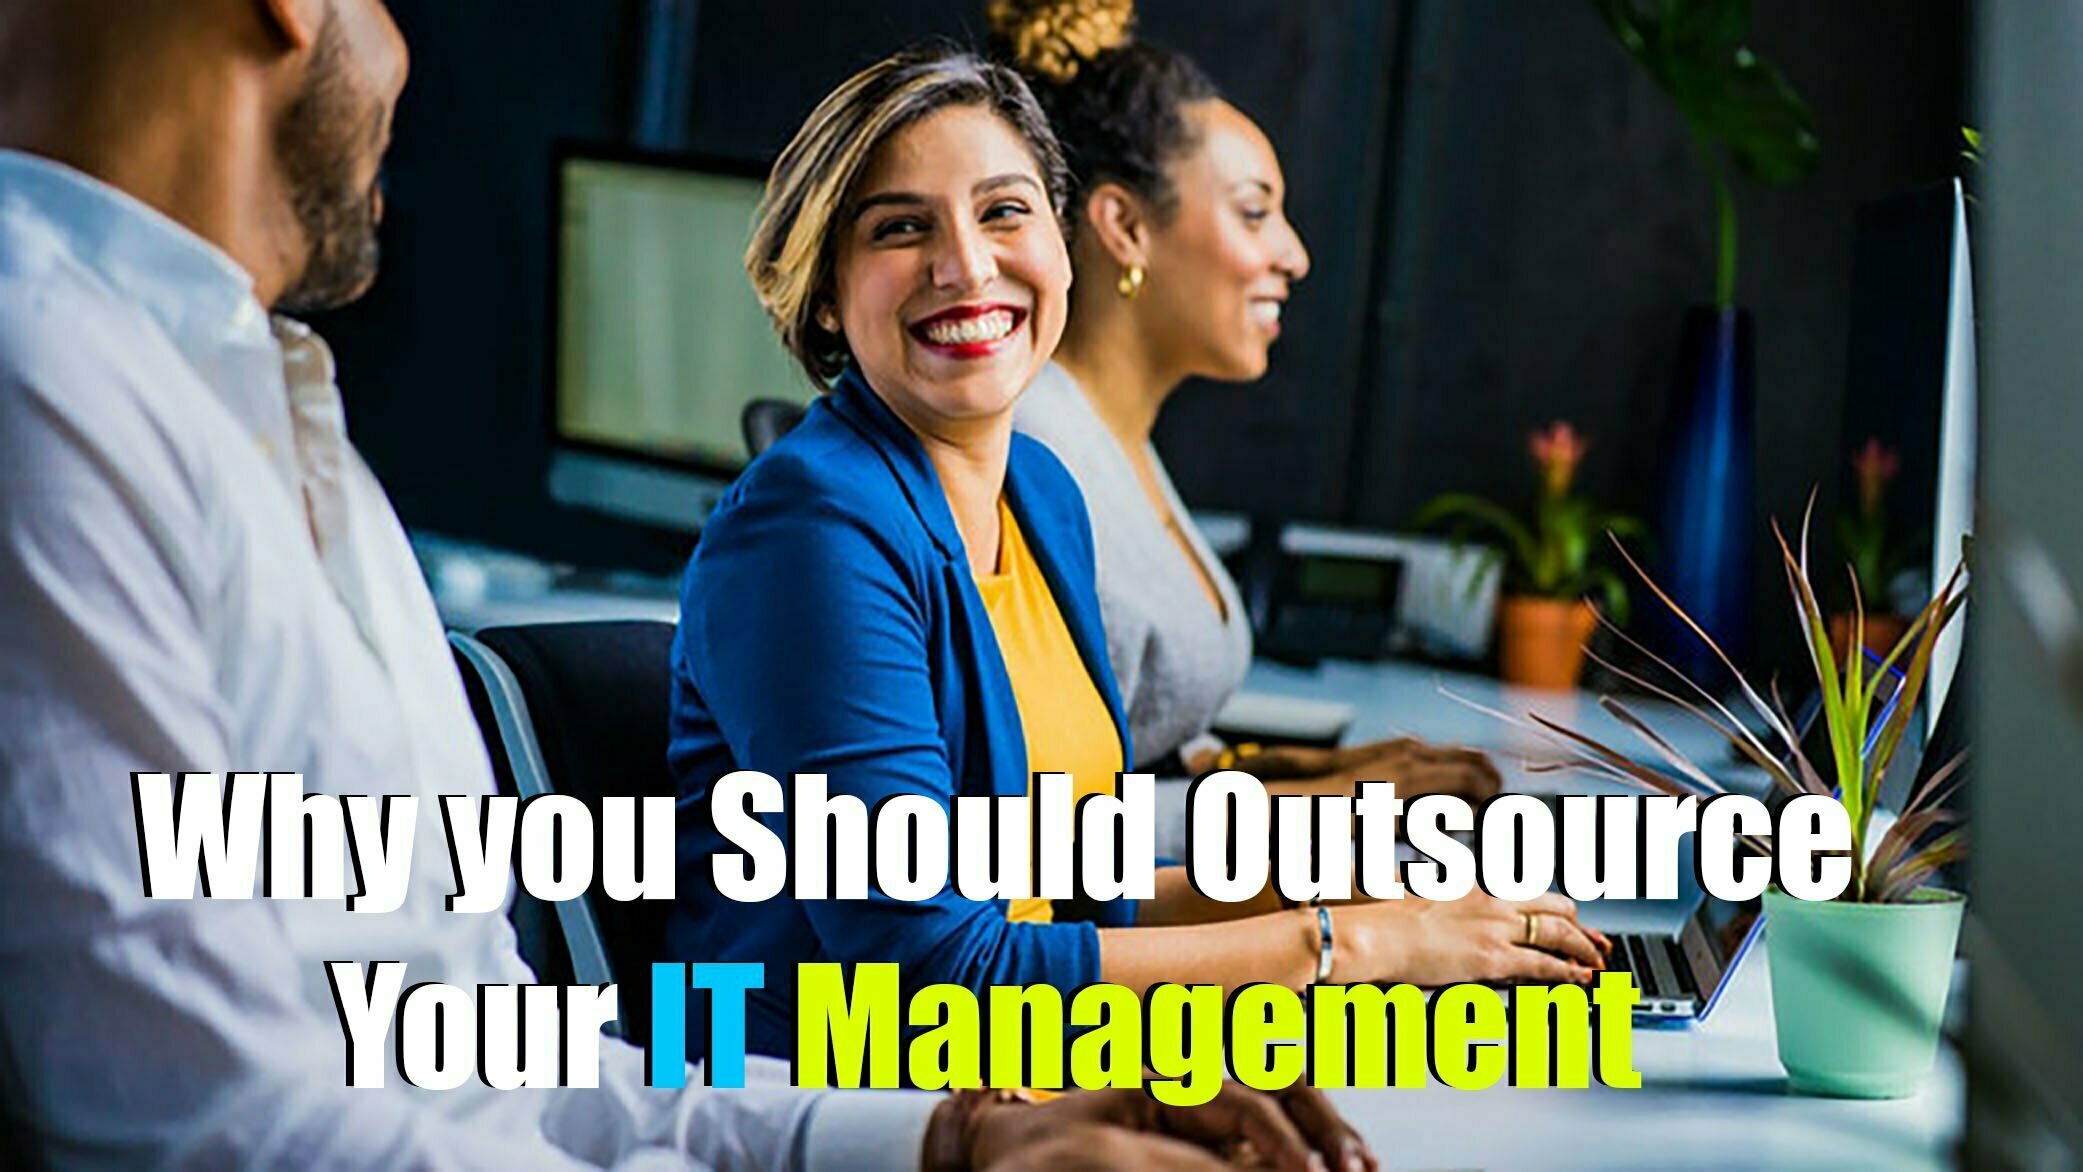 Why you Should Outsource Your IT Management